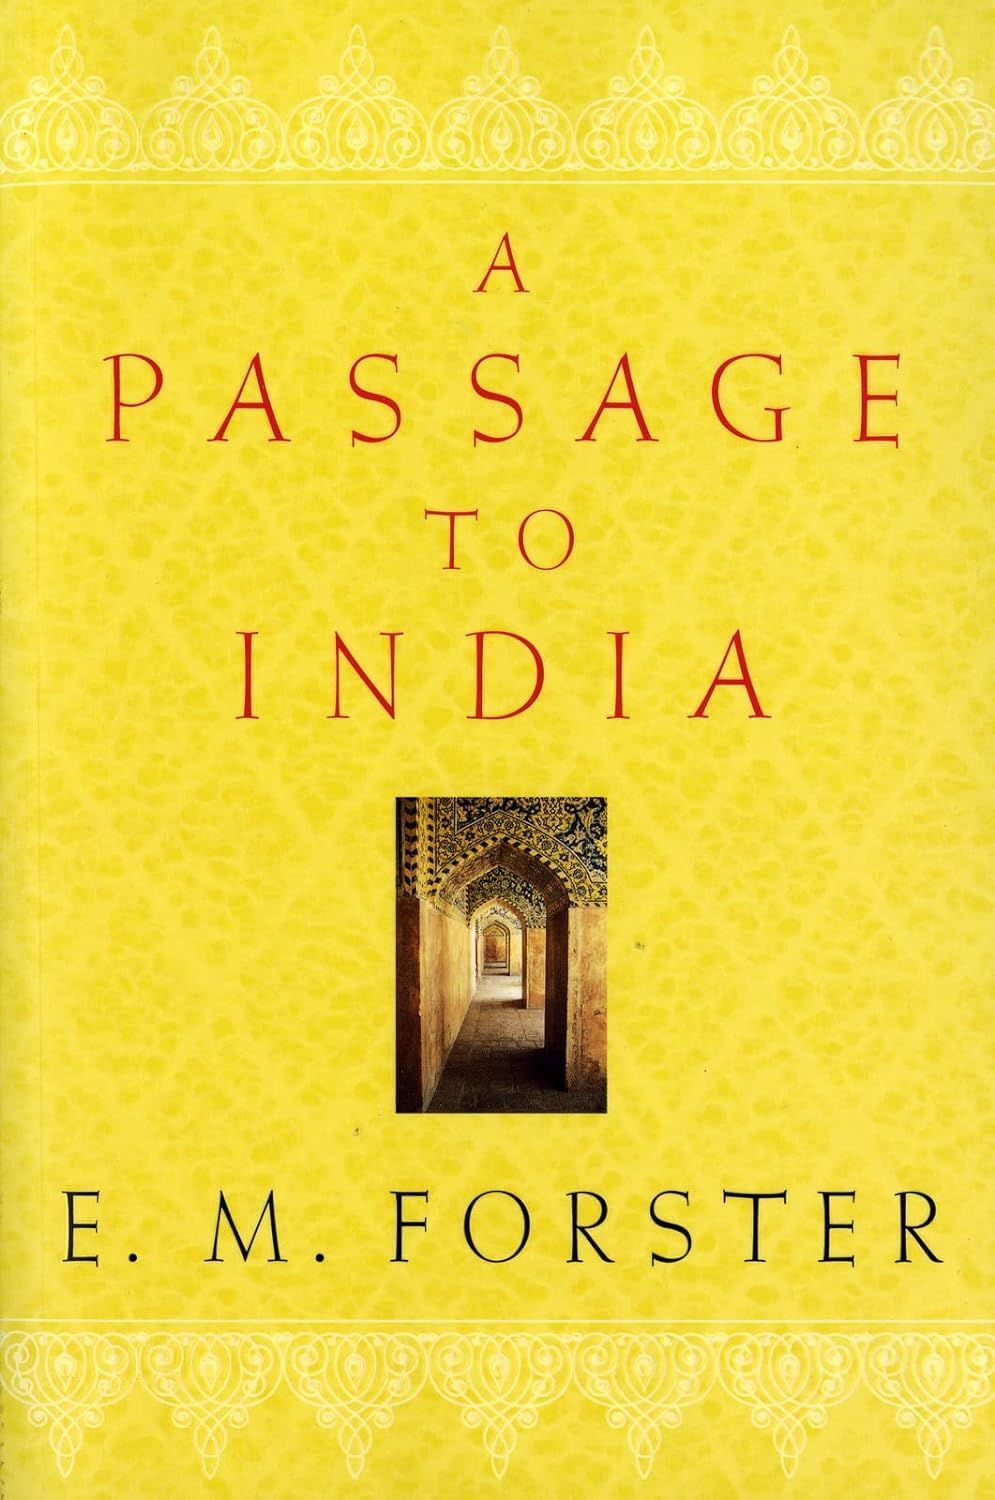 “A Passage to India” on Its 100th Birthday